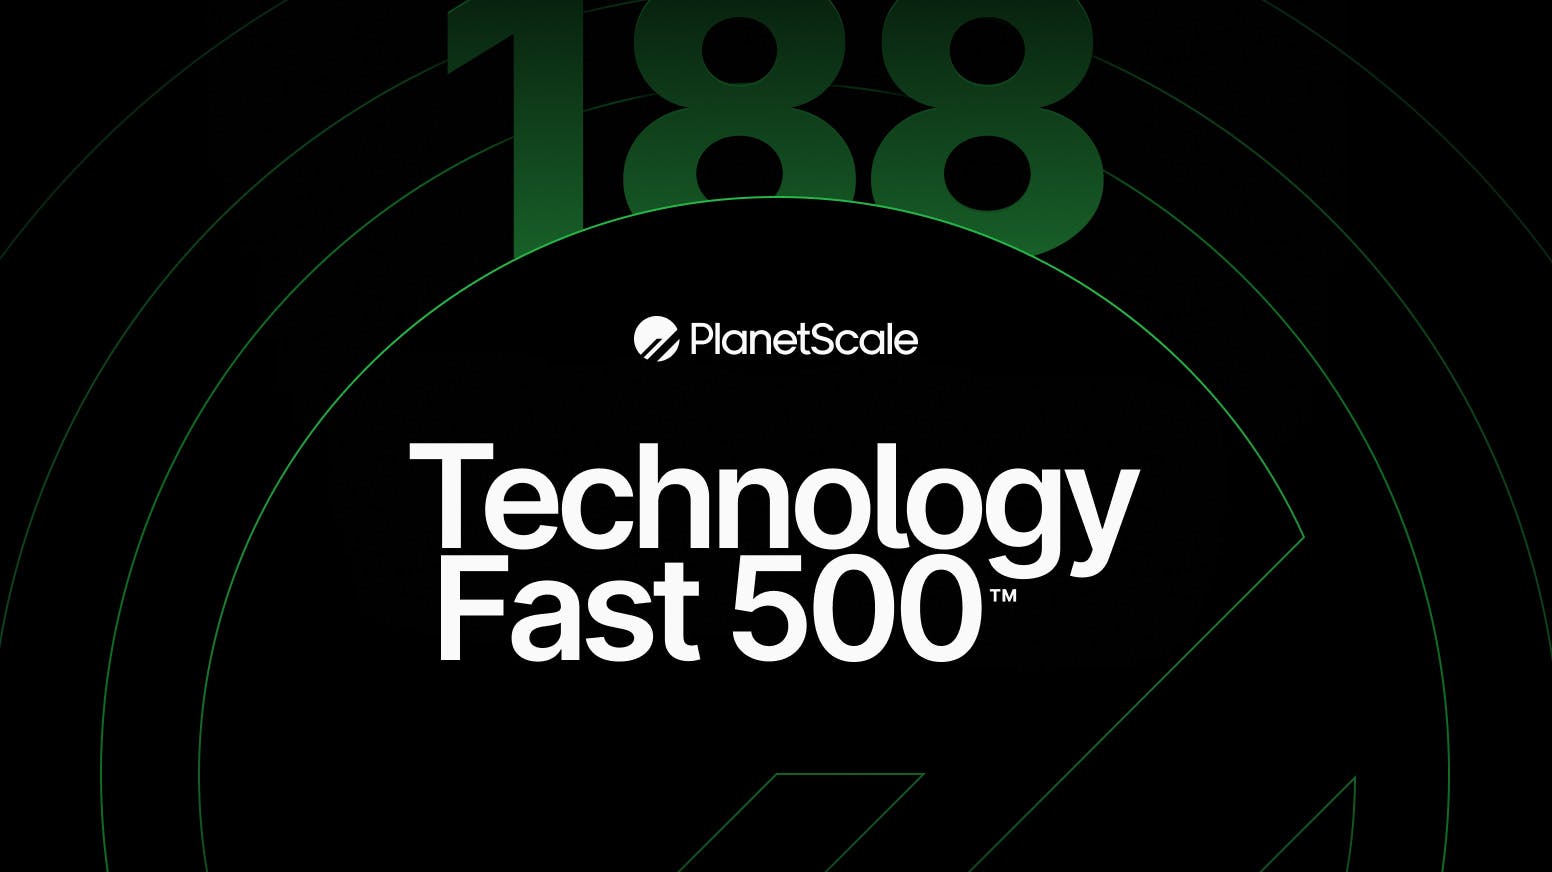 PlanetScale ranks 188th in Deloitte’s top 500 fastest-growing companies